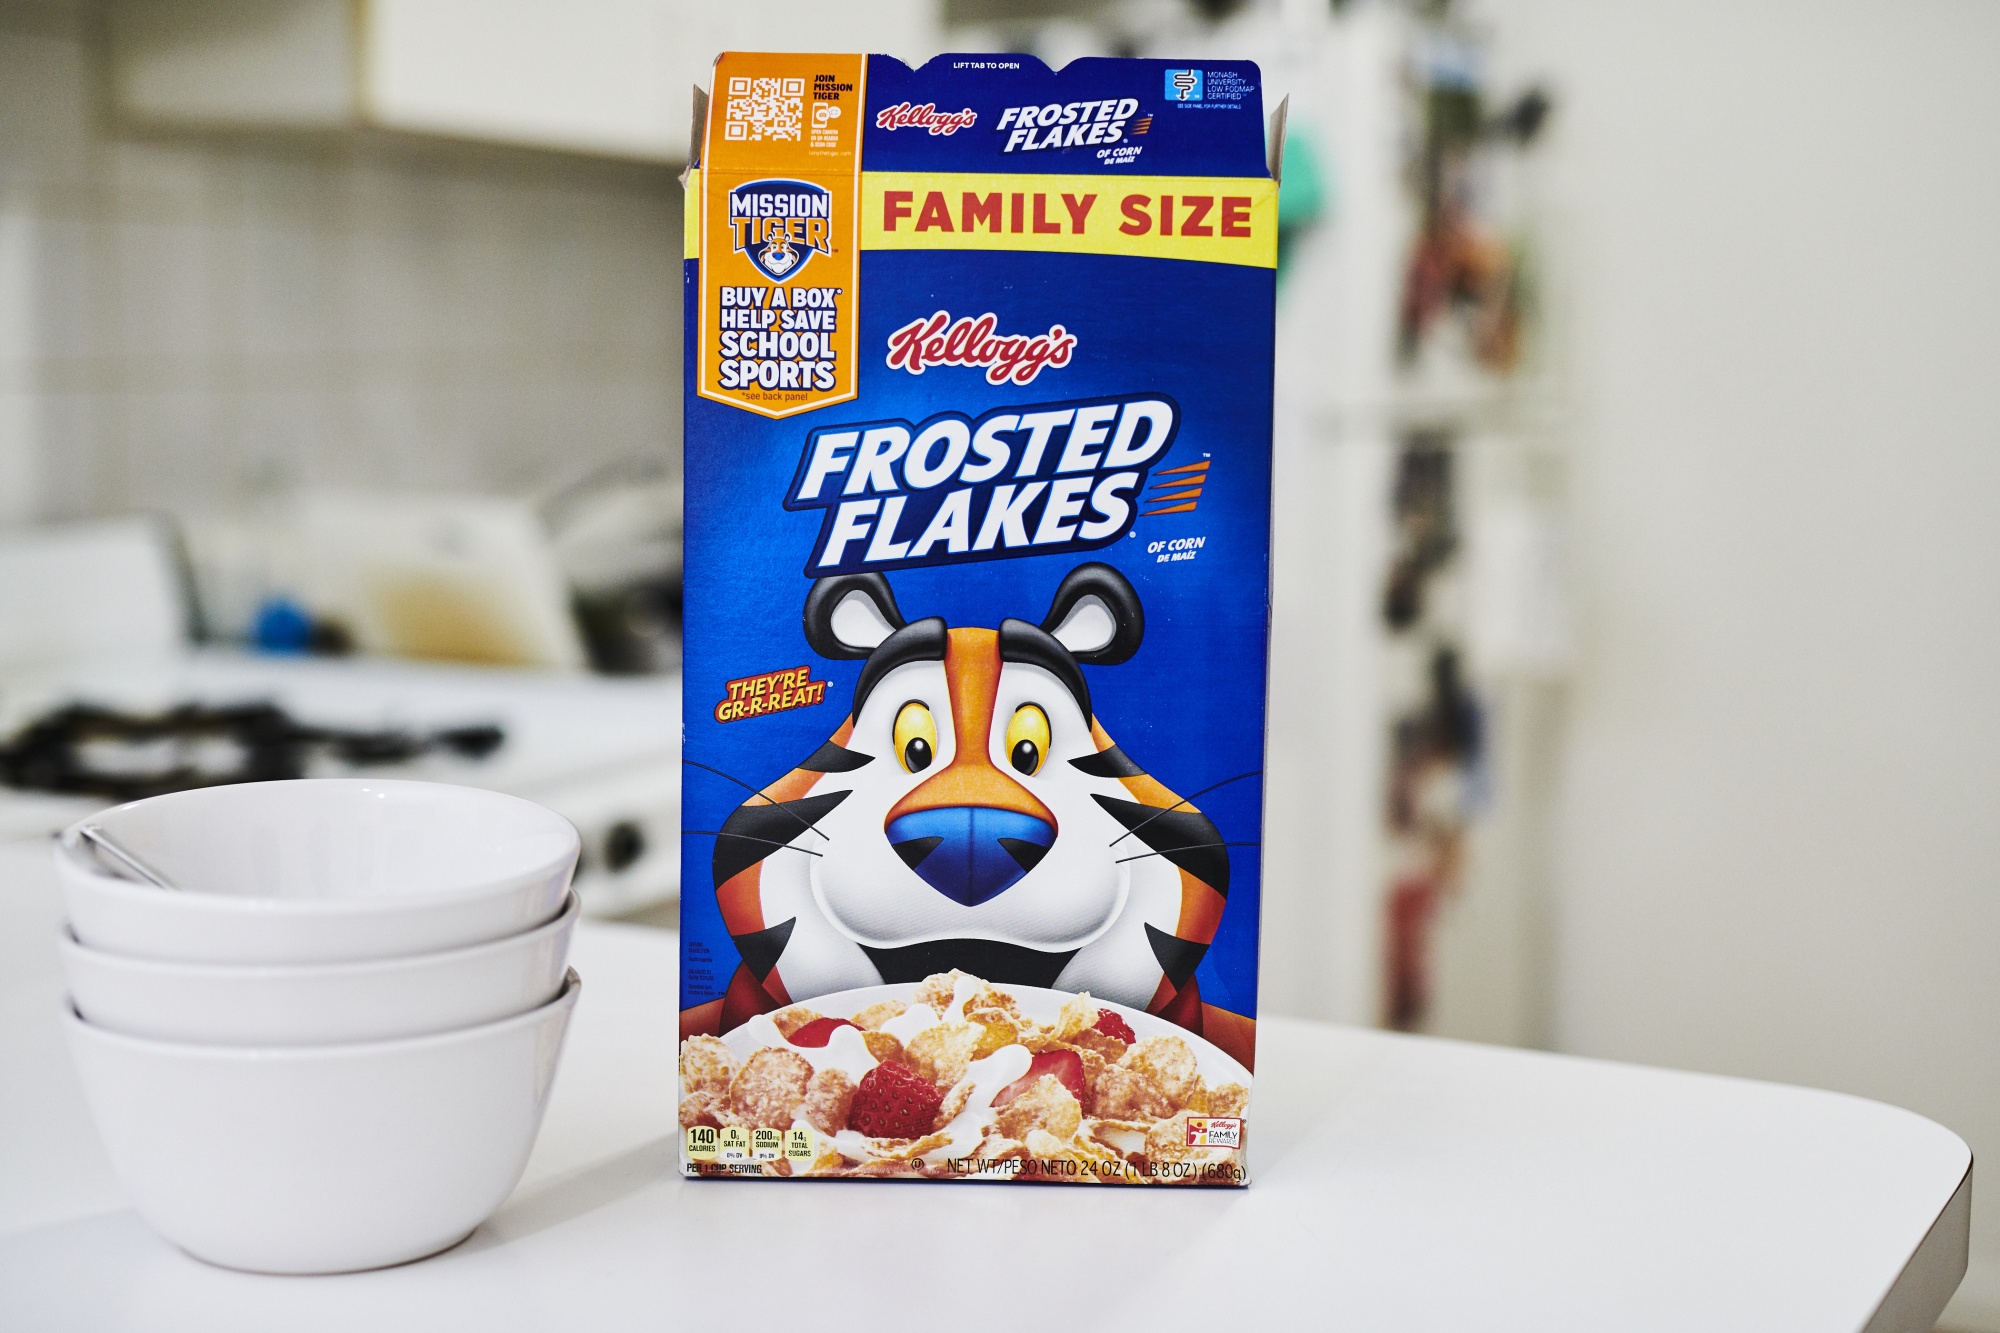 Kellogg Says It's Struggling to Meet Demand for Frosted Flakes